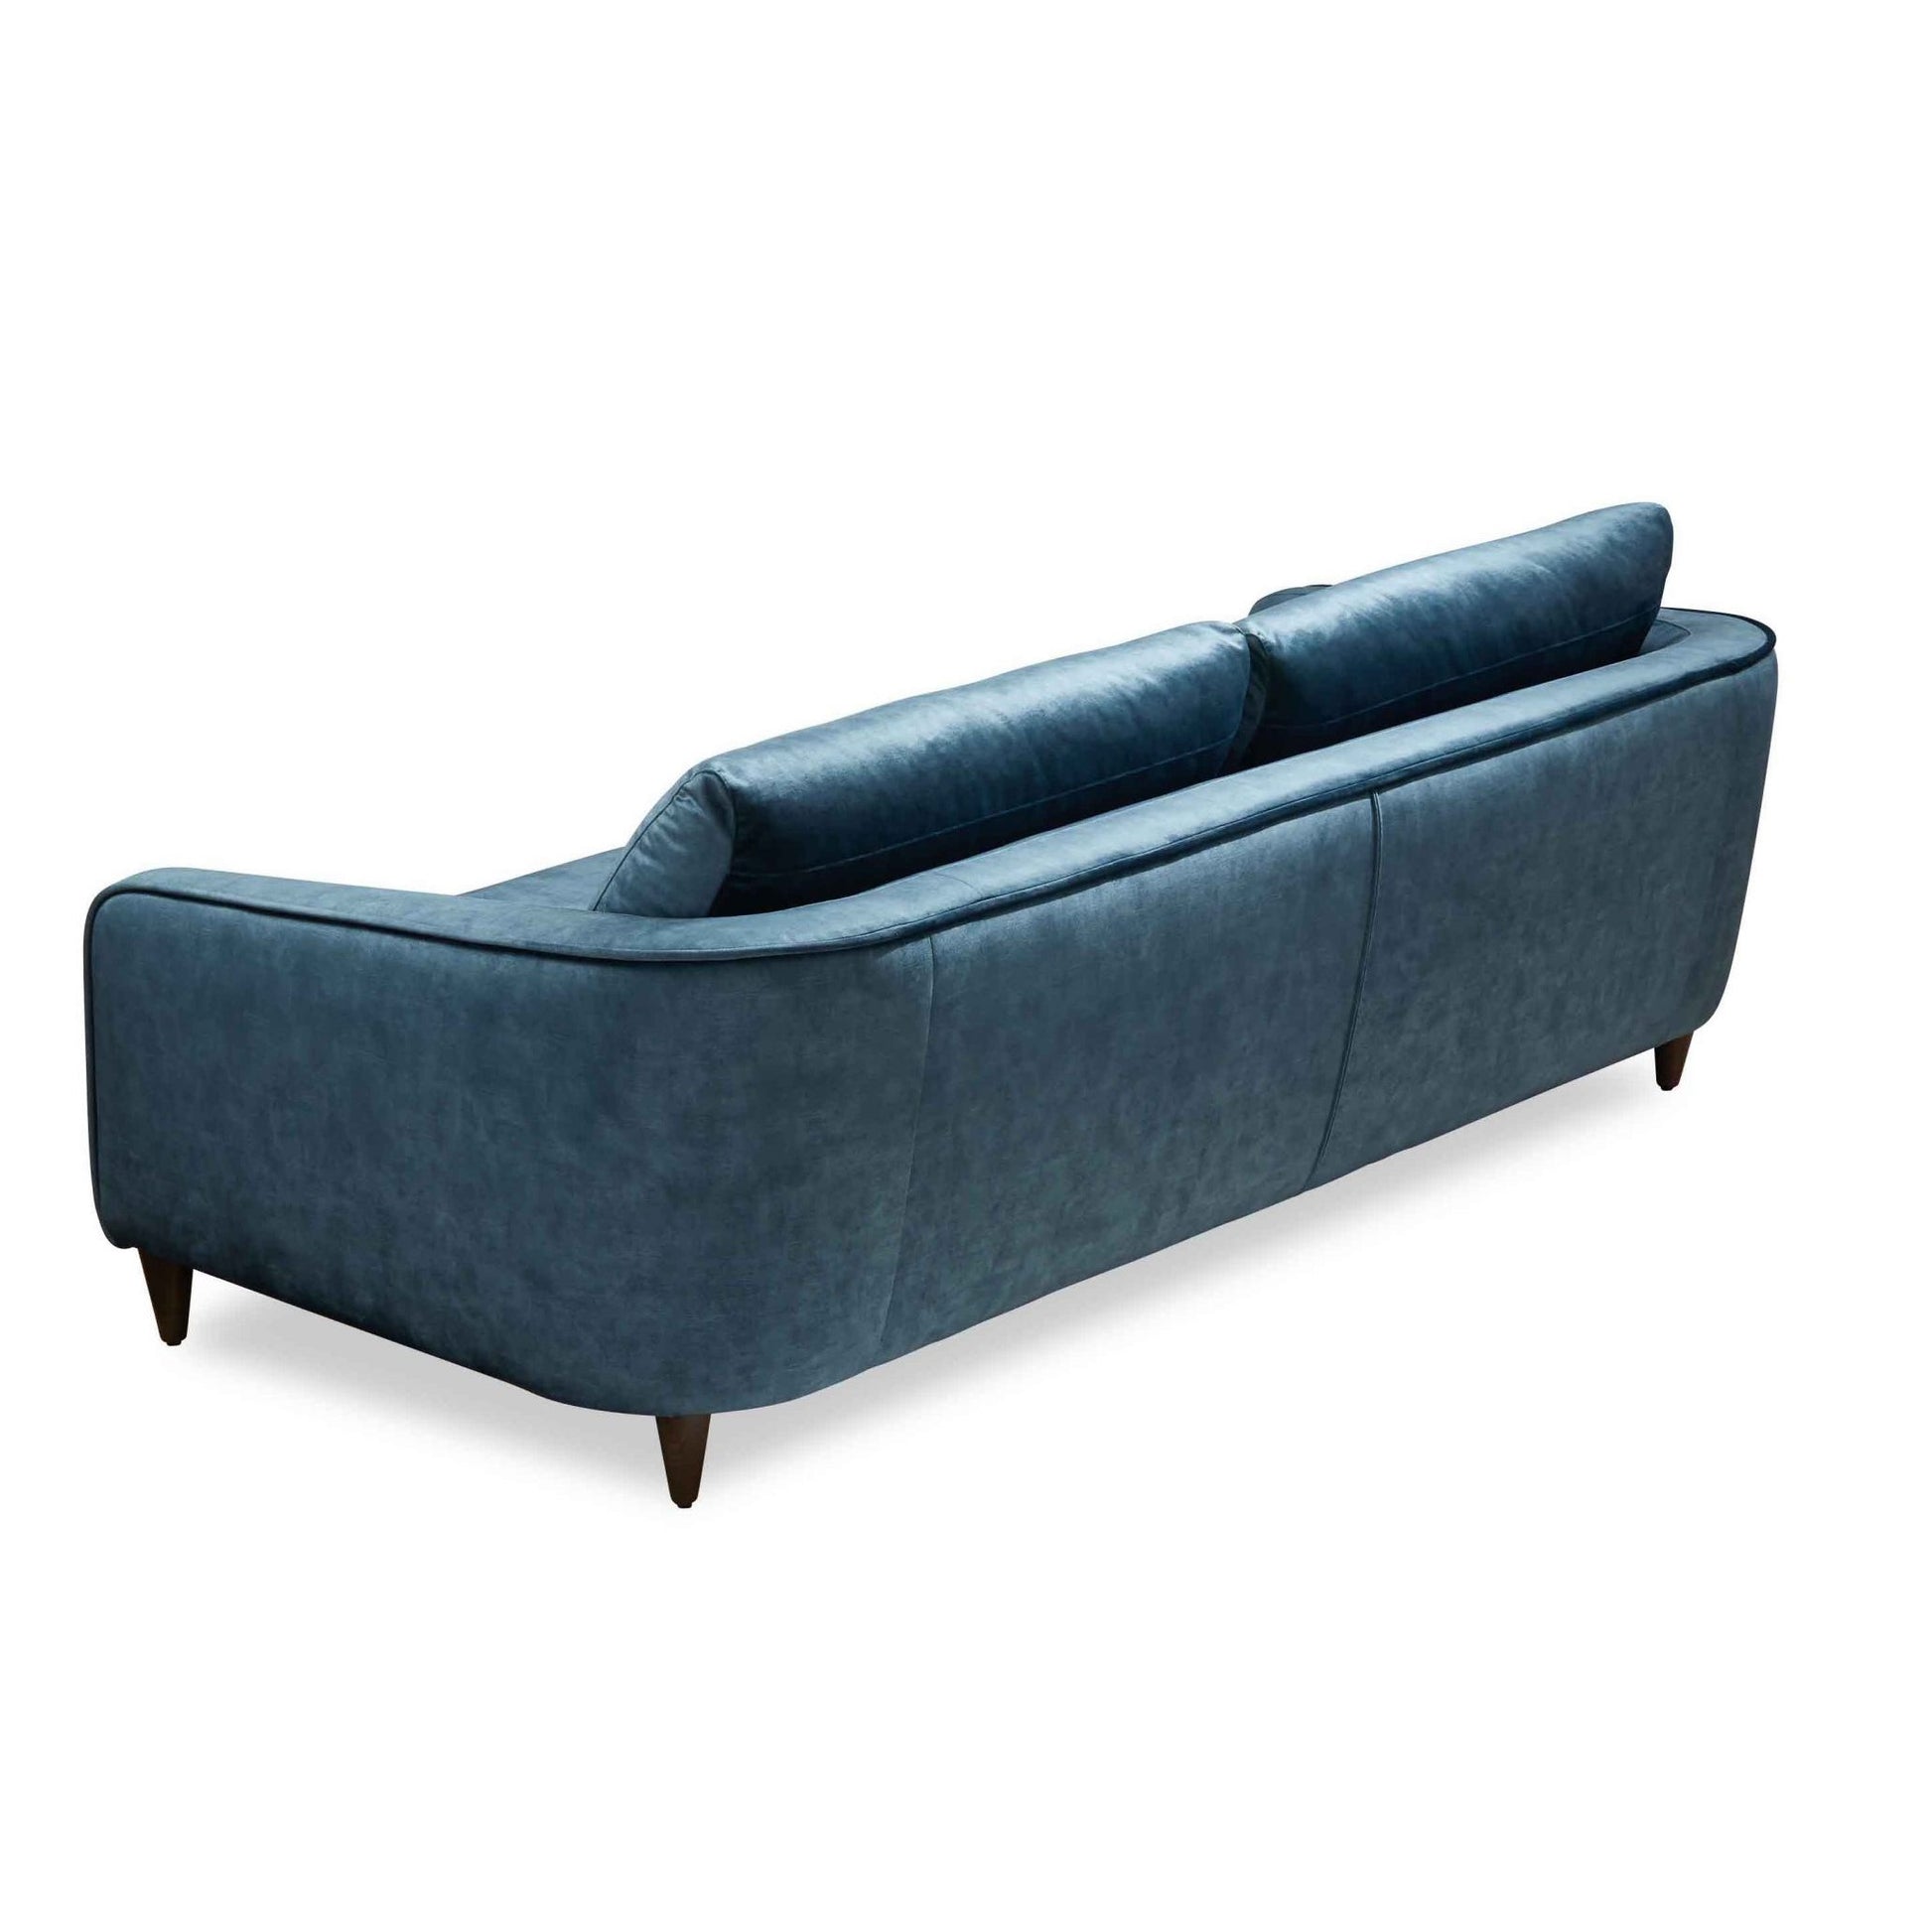 Montana Sofa by Molmic available from Make Your House A Home, Furniture Store located in Bendigo, Victoria. Australian Made in Melbourne.